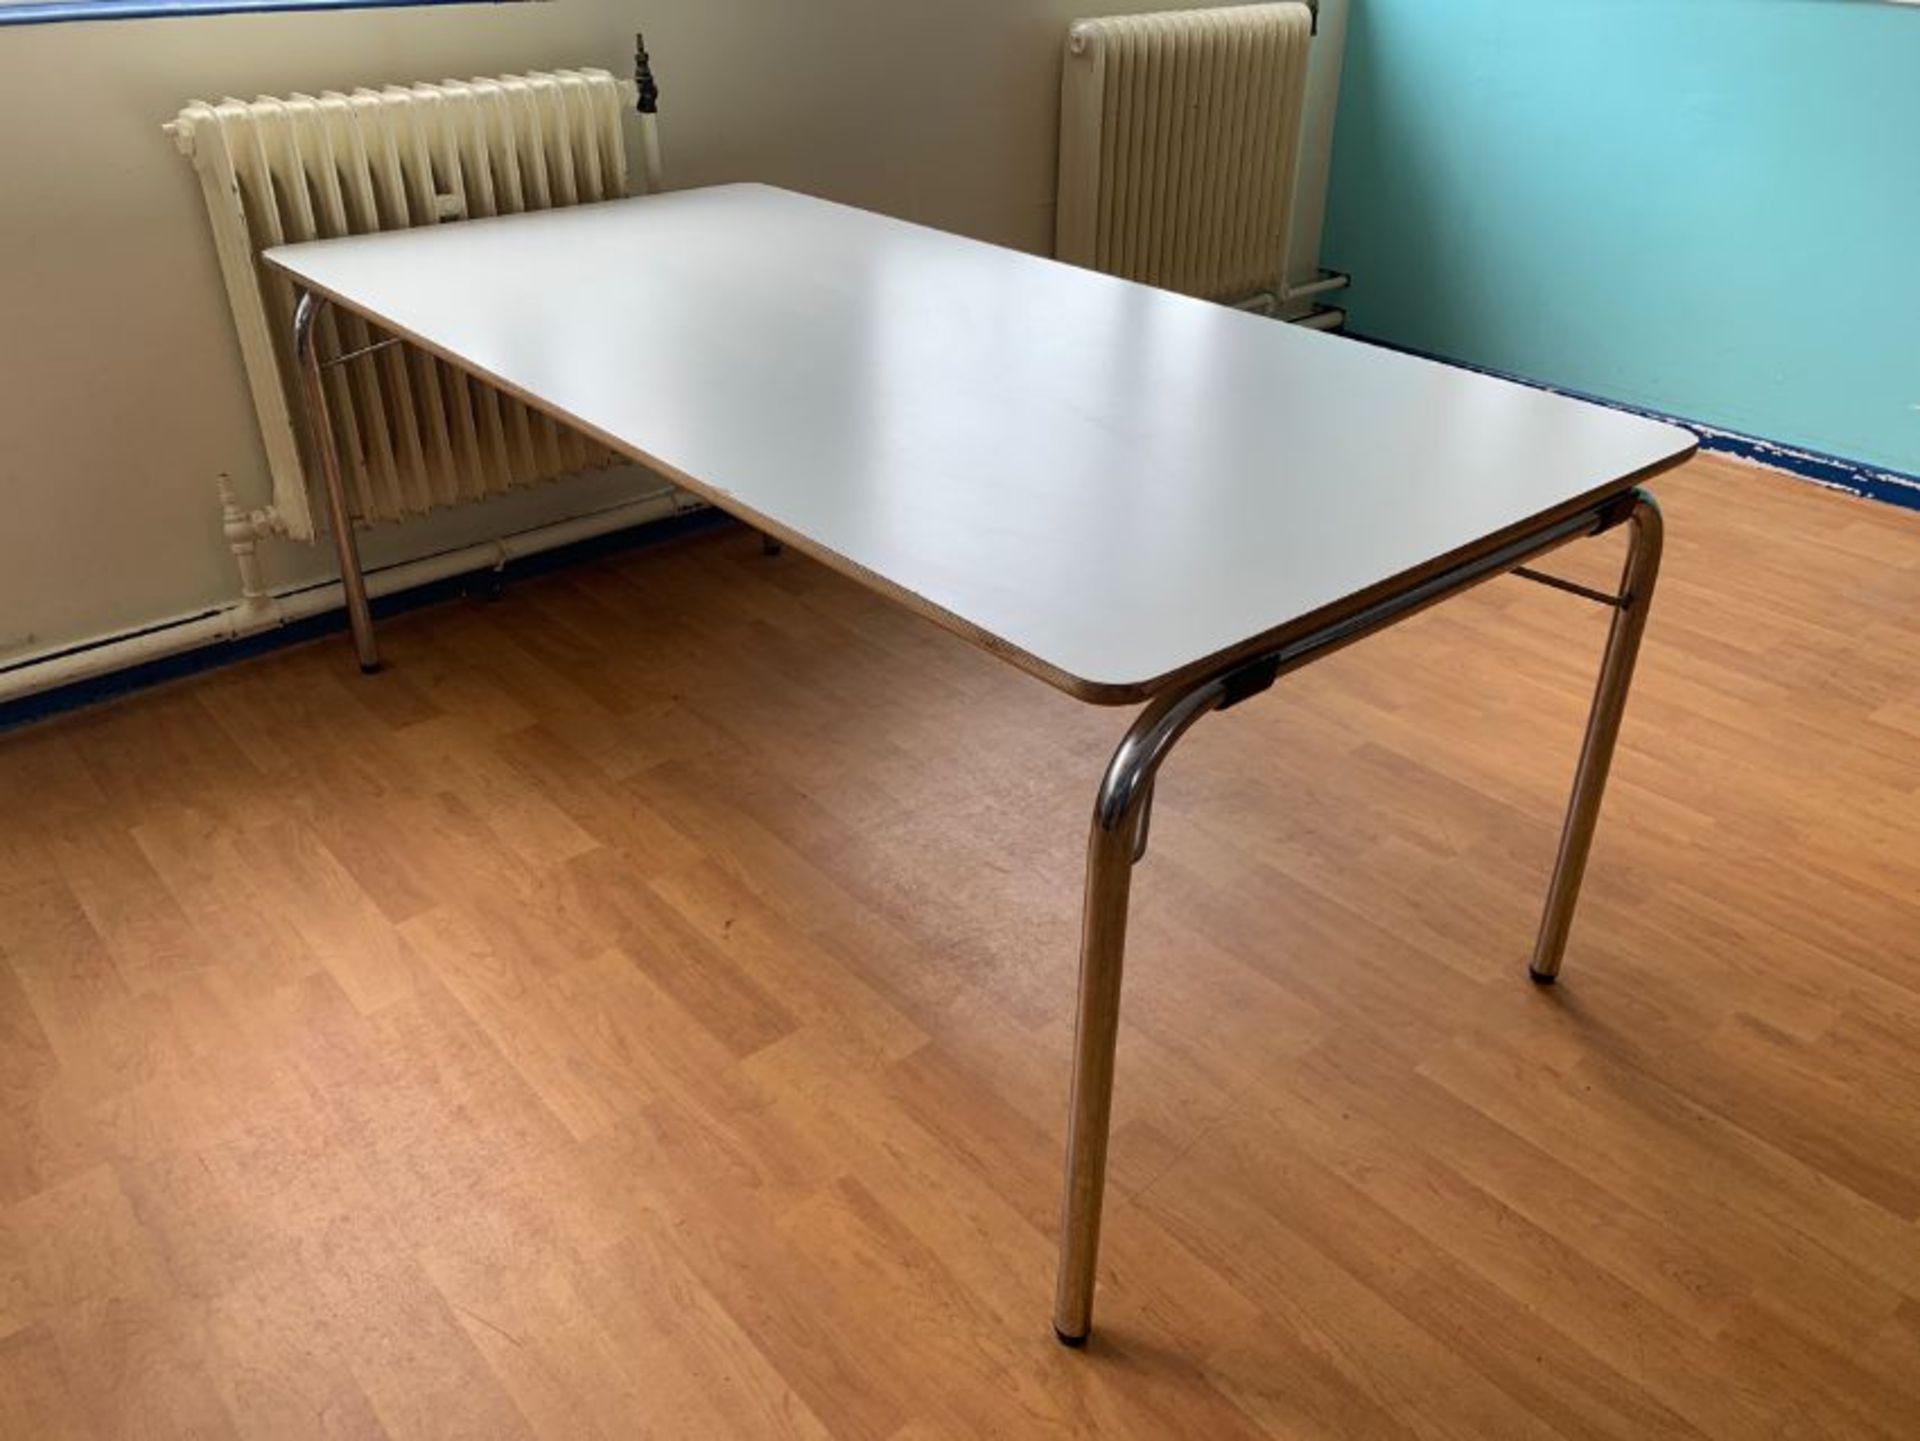 Rectangular Table with Foldable Legs - Image 3 of 8